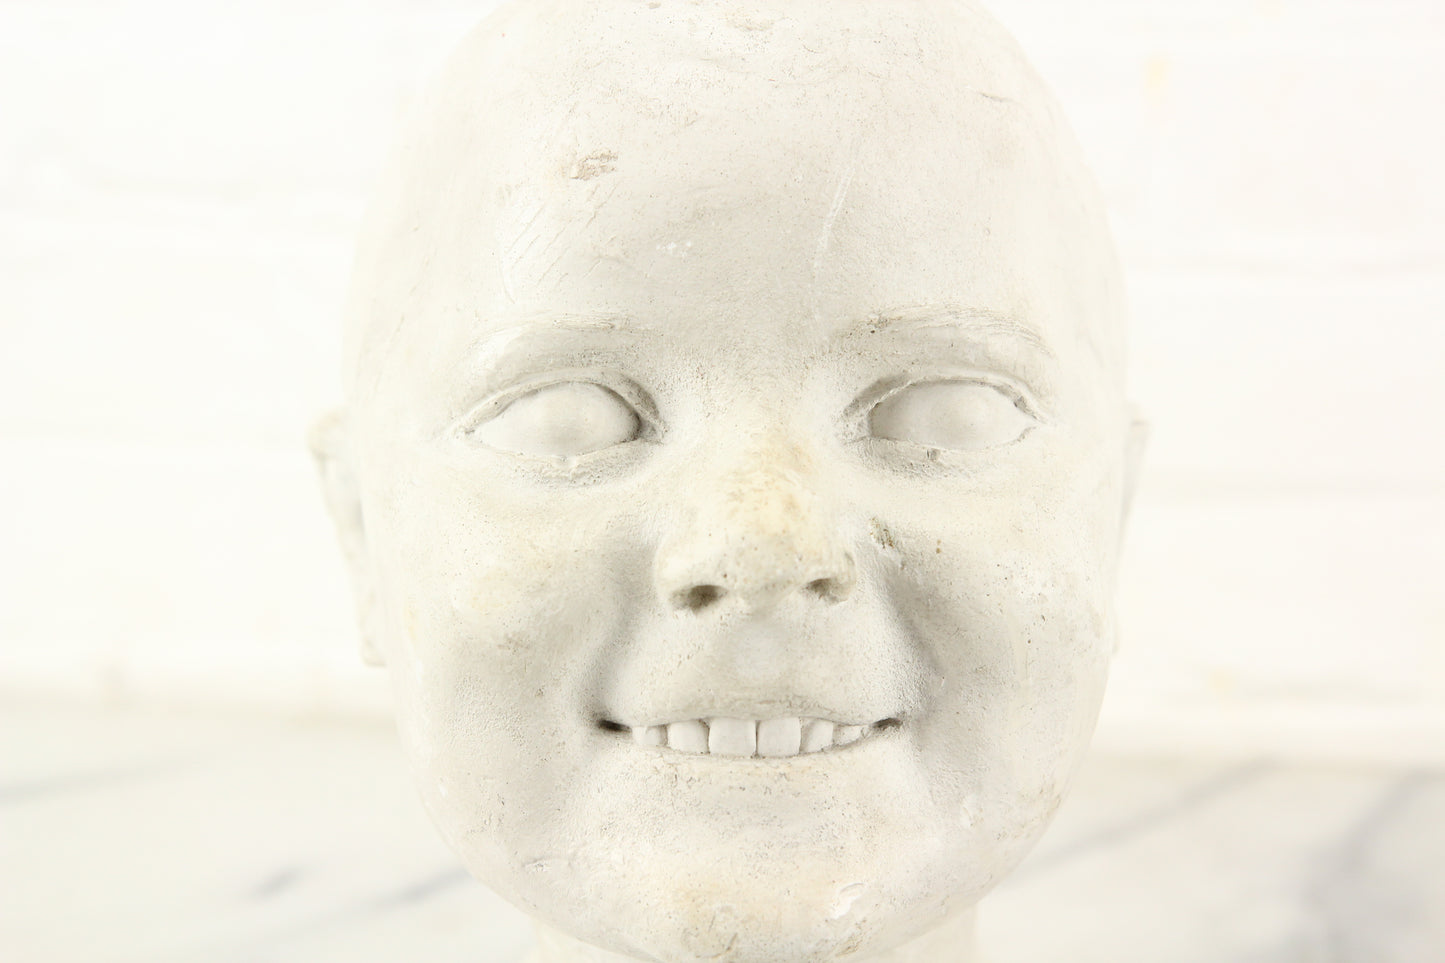 Antique Plaster Bust of a Slightly Creepy Child with a Toothy Smile